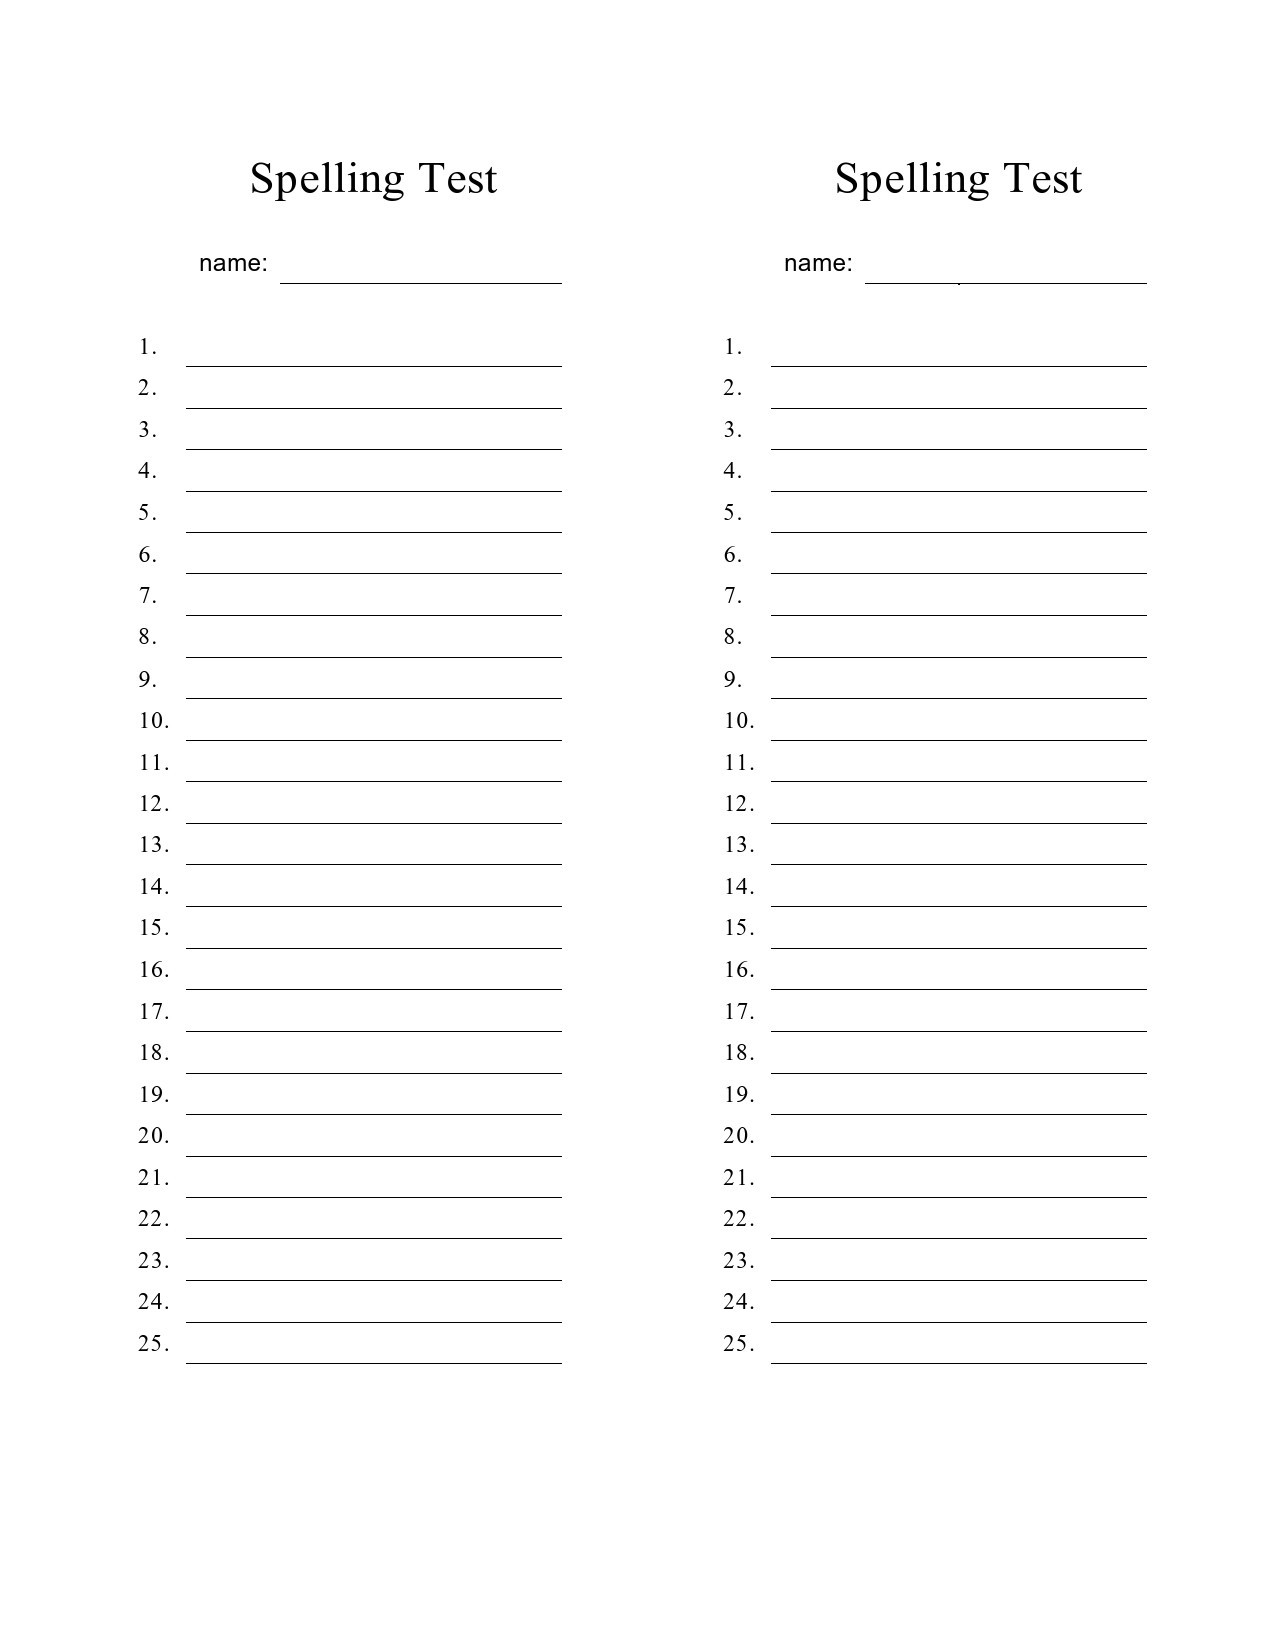 Spelling Test Template 15 Words Free Printable Printable Word Searches